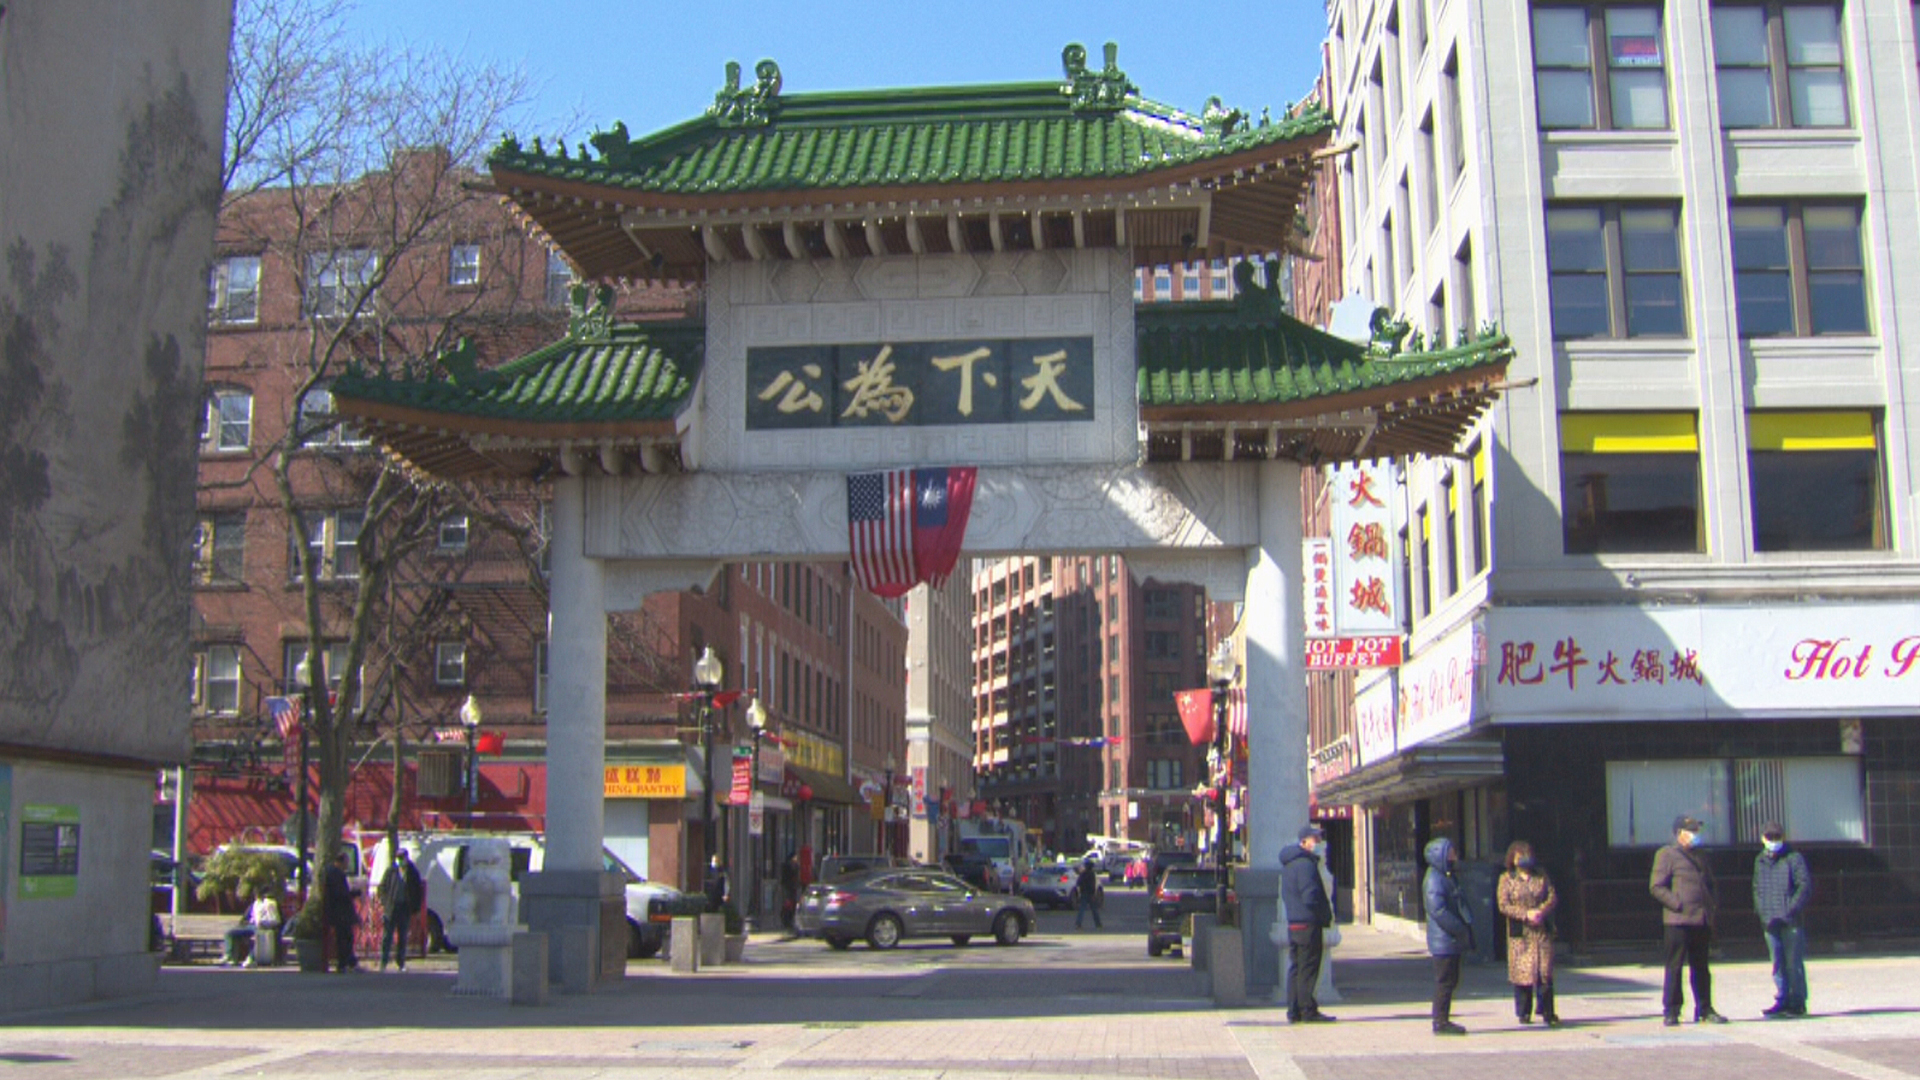 Chinatown Businesses Still Struggling 2 Years After State Of Emergency Declared